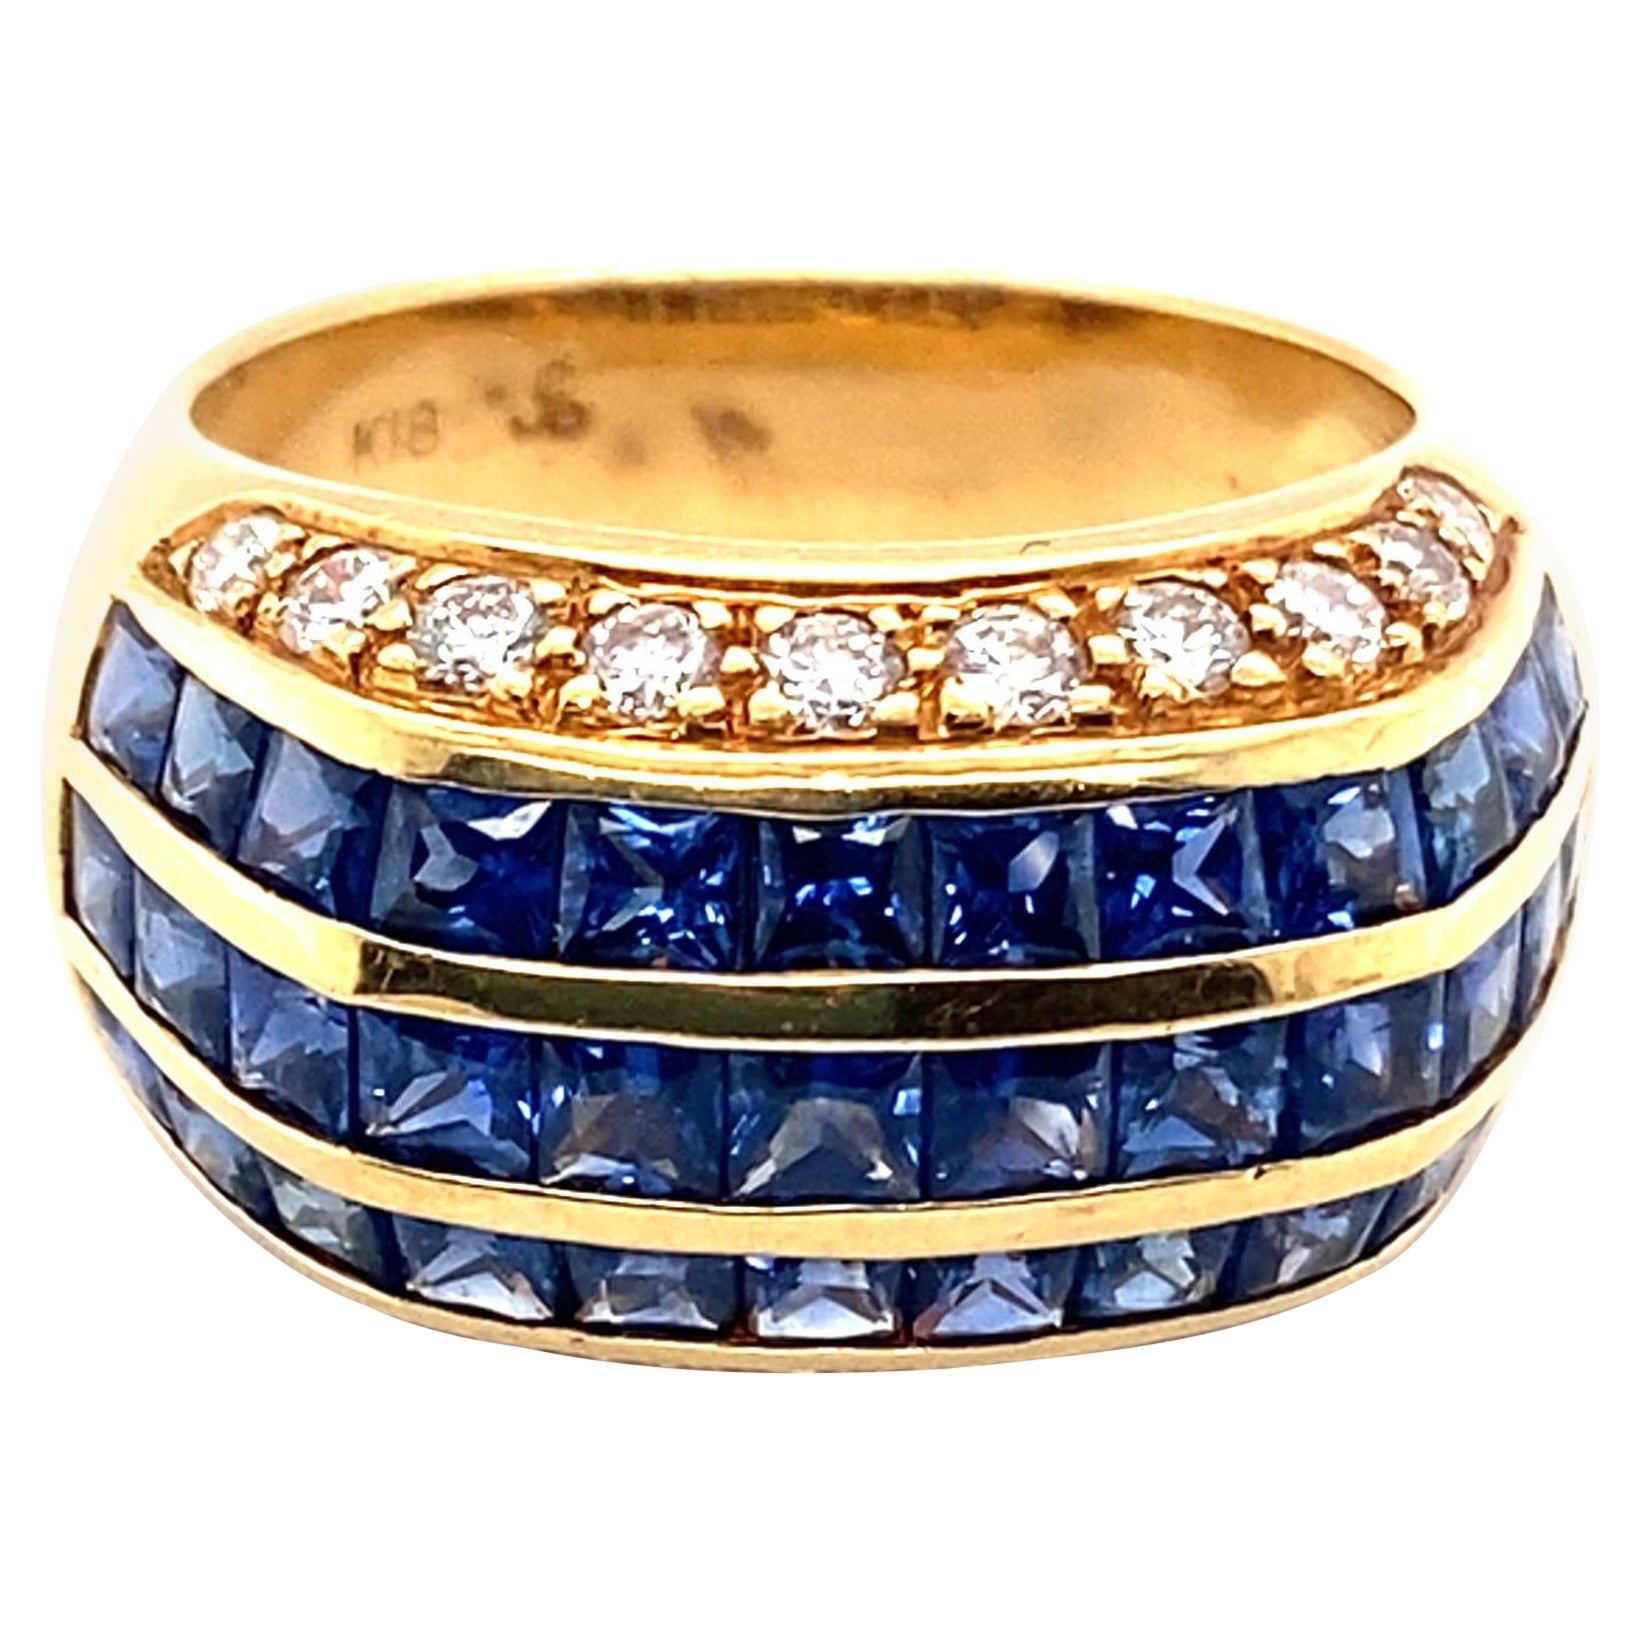 1990s 2.40 Carat Sapphire and Diamond Ring in 18 Karat Yellow Gold For Sale